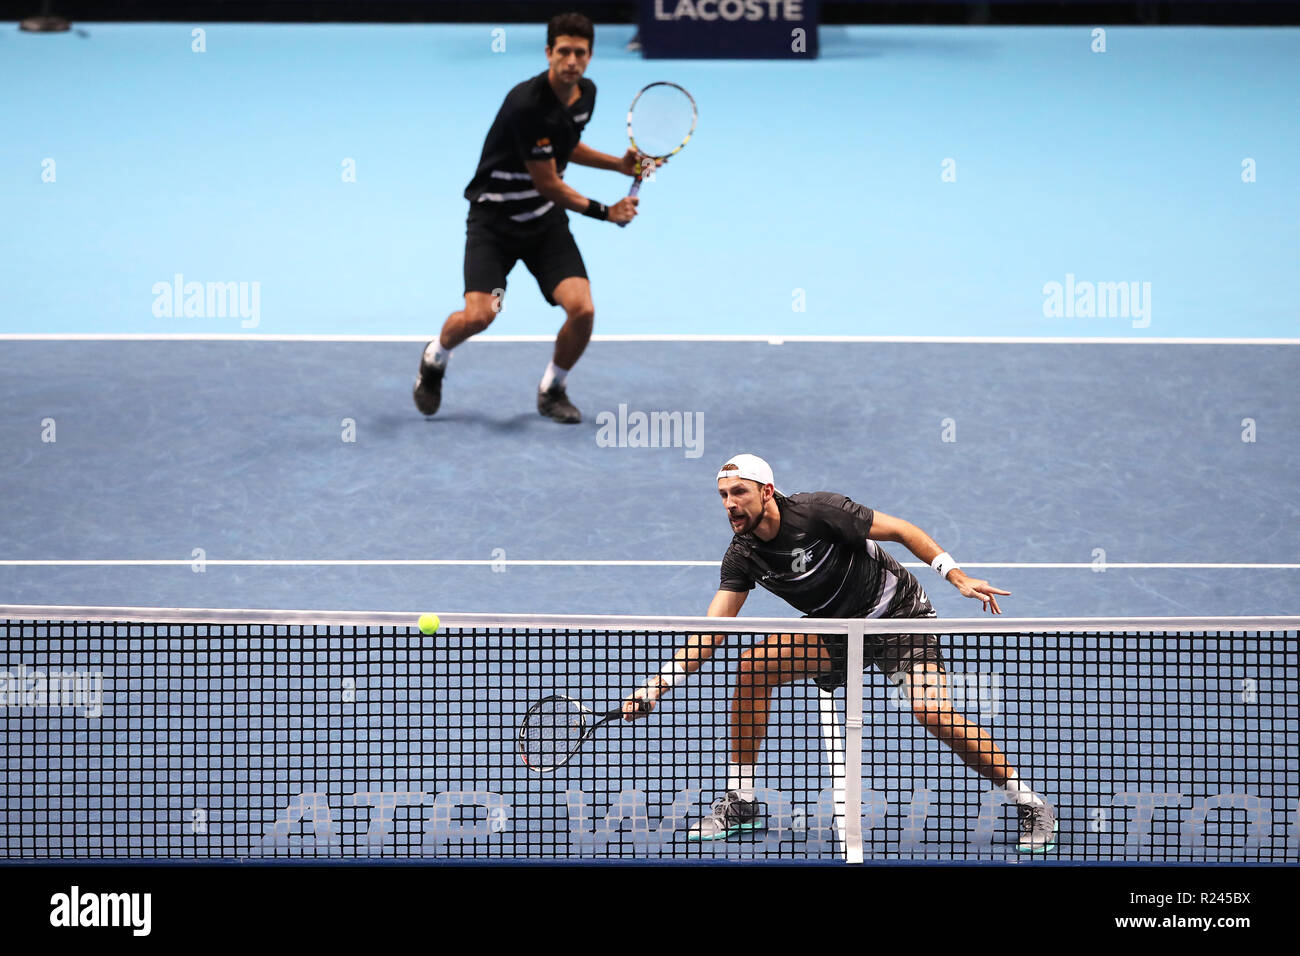 Lukasz Kubot and Marcelo Melo during the Doubles match during day six of the Nitto ATP Finals at The O2 Arena, London. PRESS ASSOCIATION Photo. Picture date: Friday November 16, 2018. See PA story TENNIS London. Photo credit should read: John Walton/PA Wire. . Stock Photo